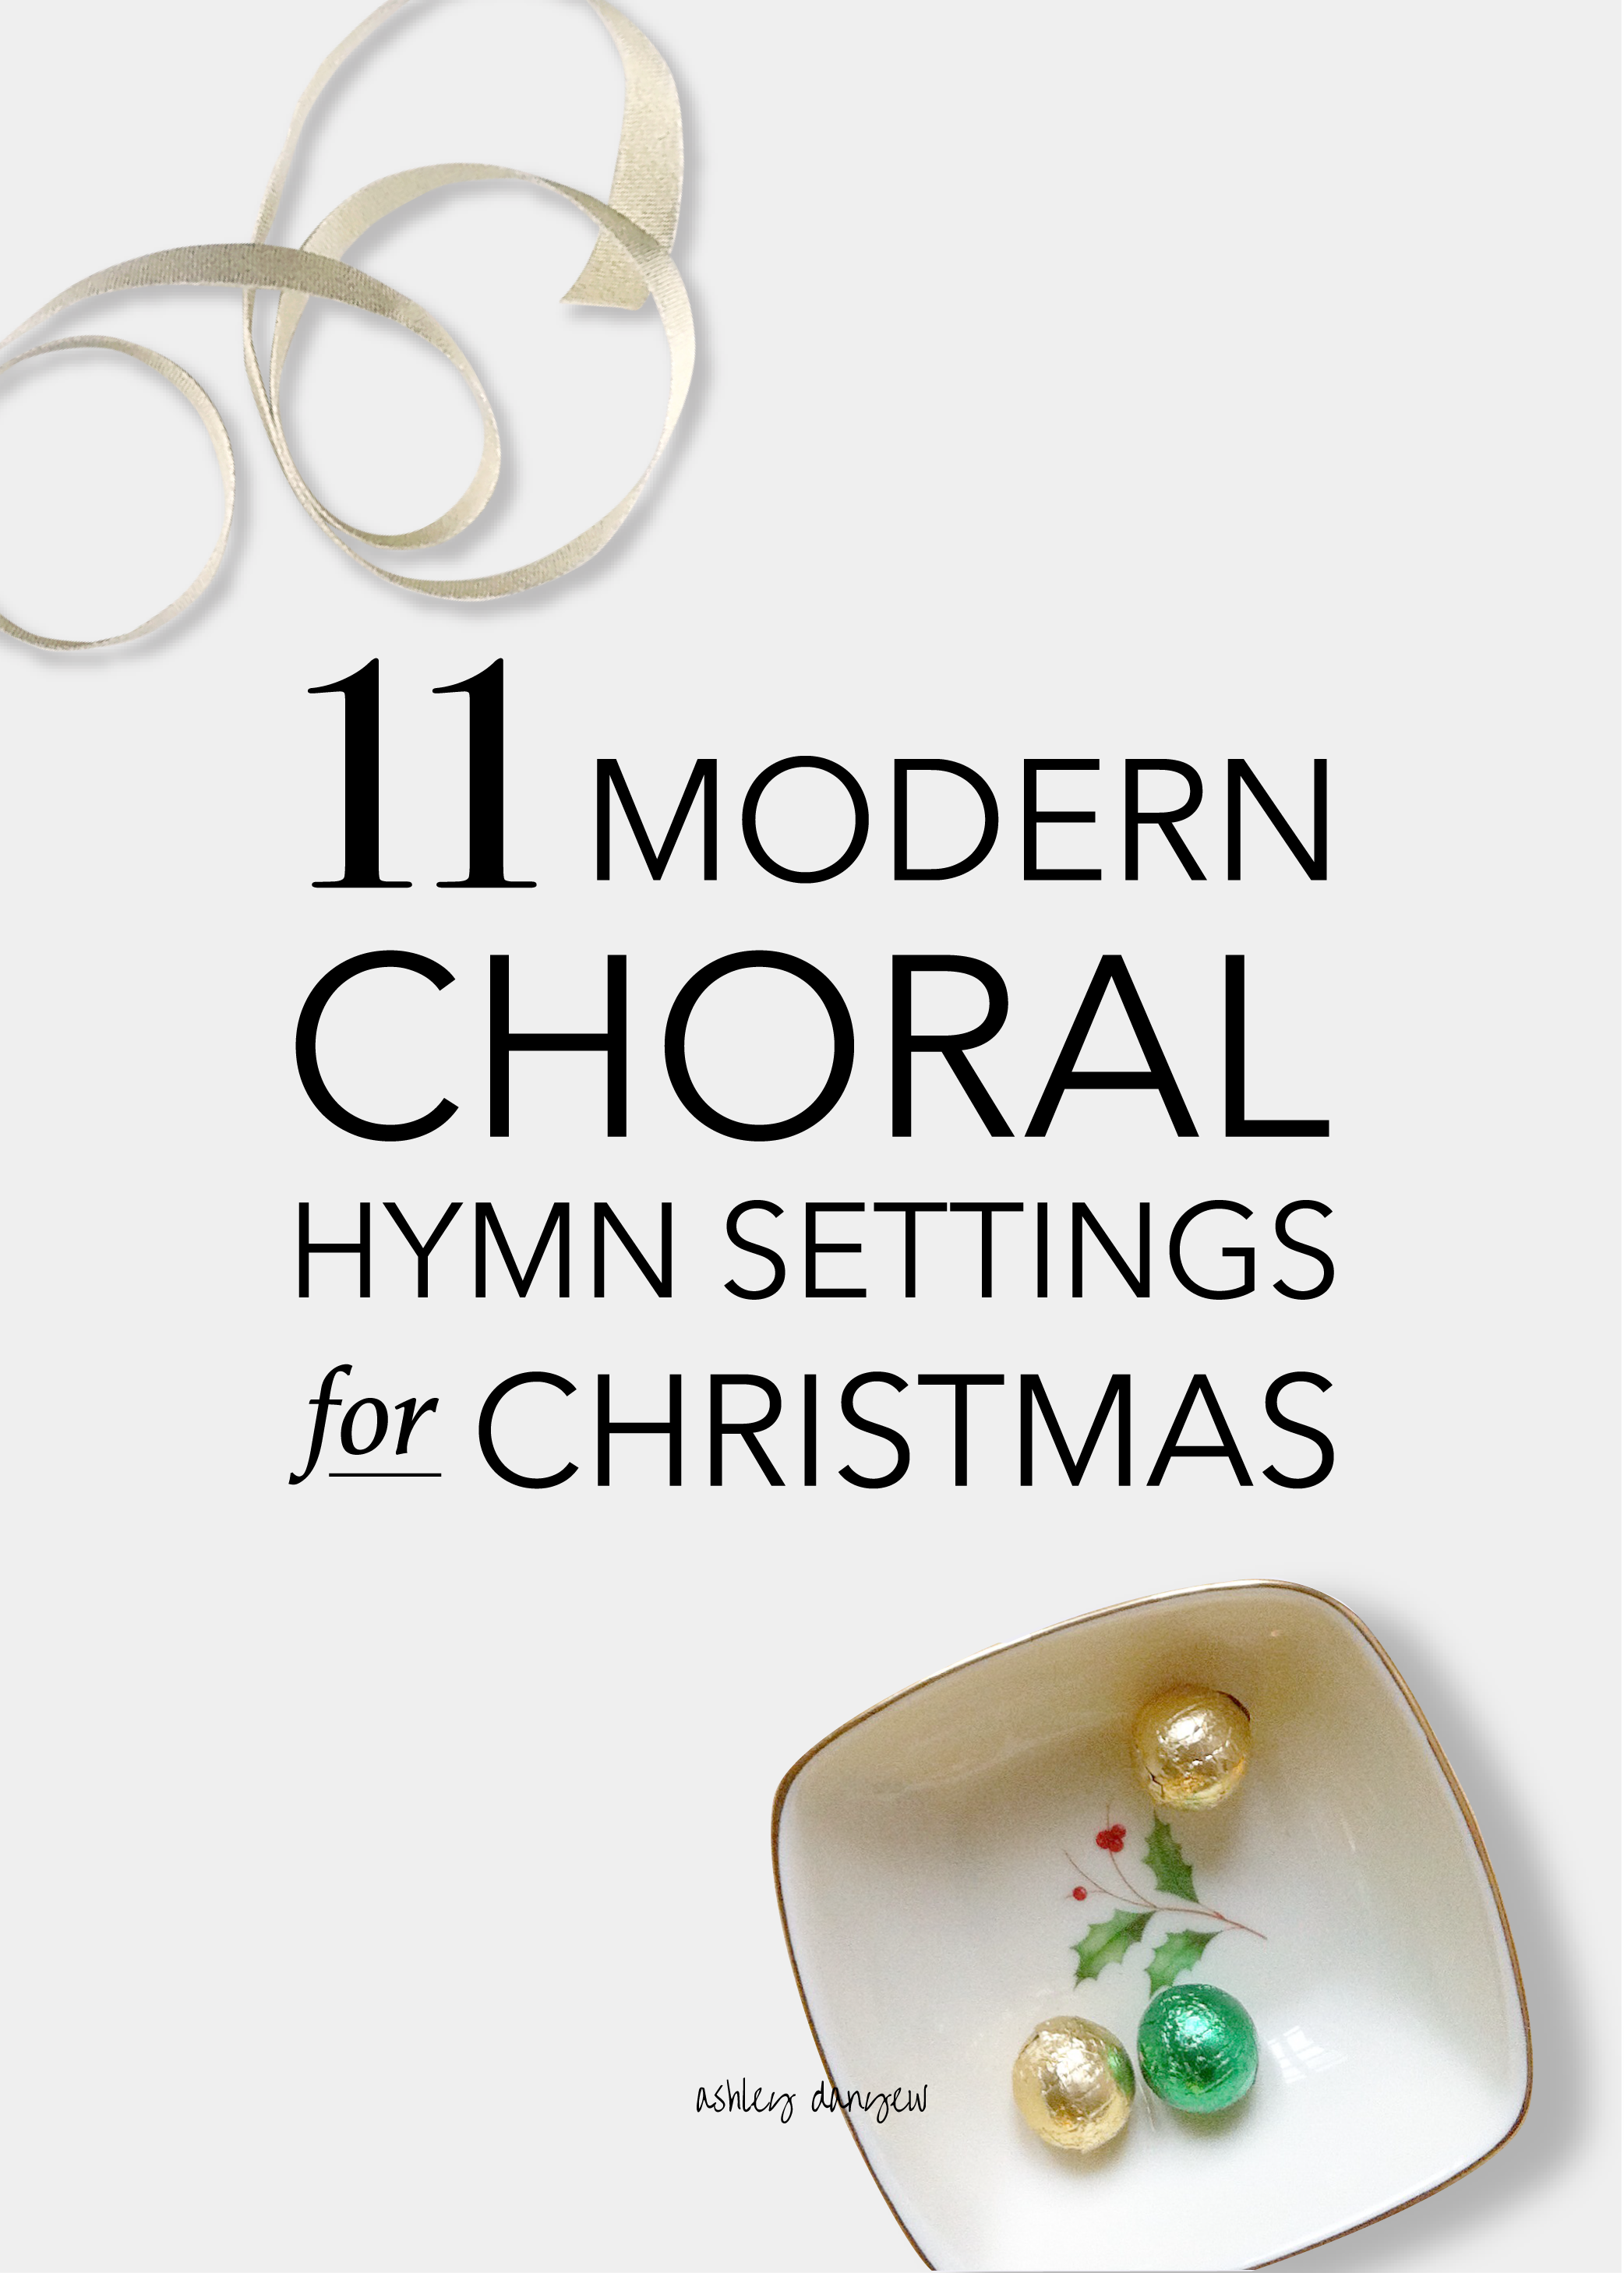 Copy of 11 Modern Choral Hymn Settings for Christmas